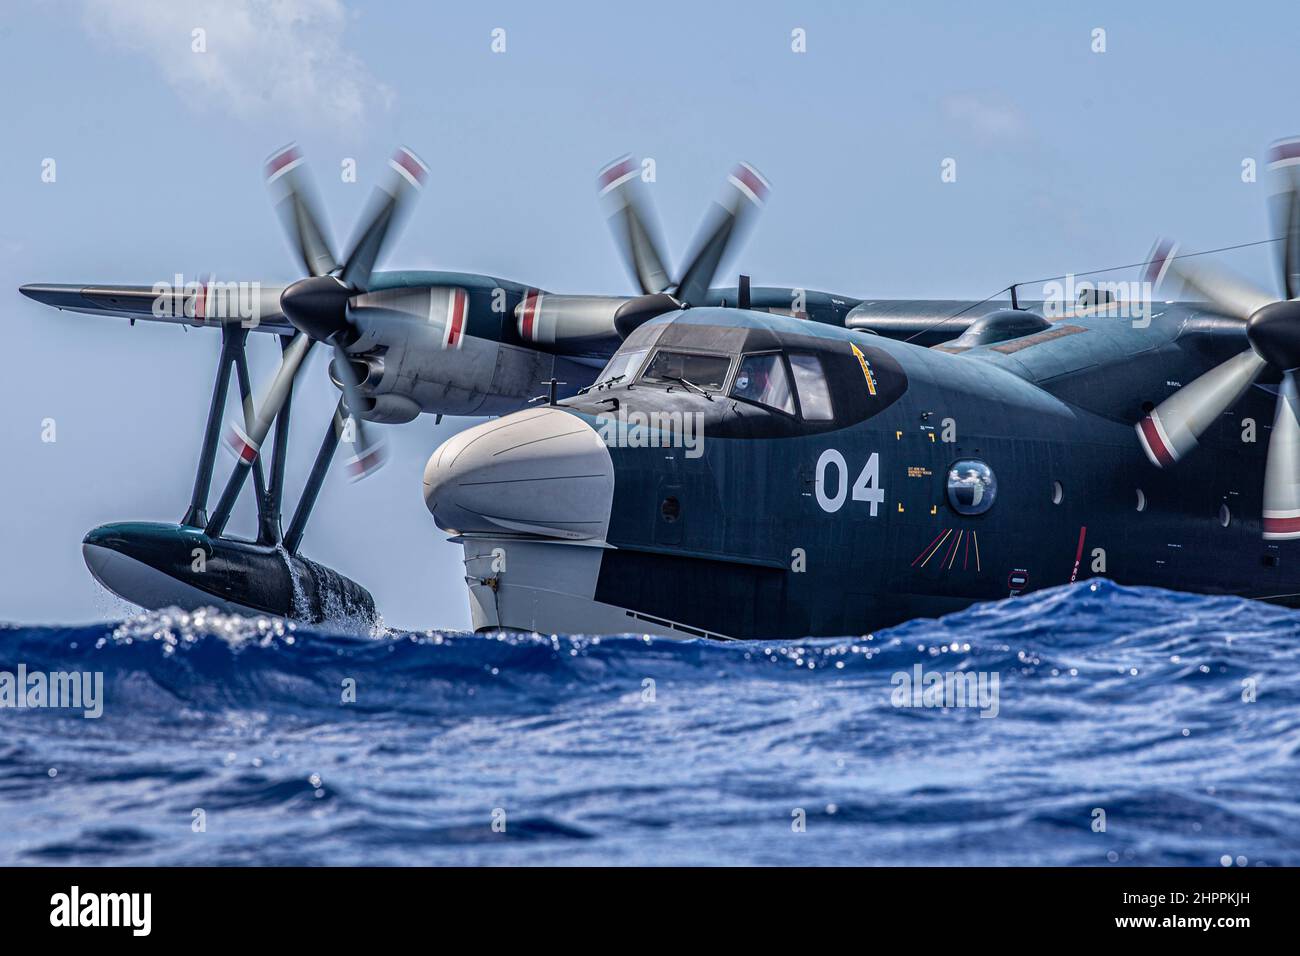 A Japanese ShinMaywa US-2 floats in the ocean during exercise Cope North 22 at the Island of Tinian near Andersen Air Force Base, Guam, Feb. 14, 2022. Japanese and U.S. Air Force members trained together in participation of Cope North 2022, multilateral U.S. Pacific Air Forces-sponsored field training exercise conducted annually at Andersen AFB, Guam focused on combat air forces’ large-force employment and humanitarian assistance and disaster relief training to enhance interoperability among U.S., Australian, and Japanese forces. (U.S. Air Force photo by Senior Airman Joseph P. LeVeille) Stock Photo